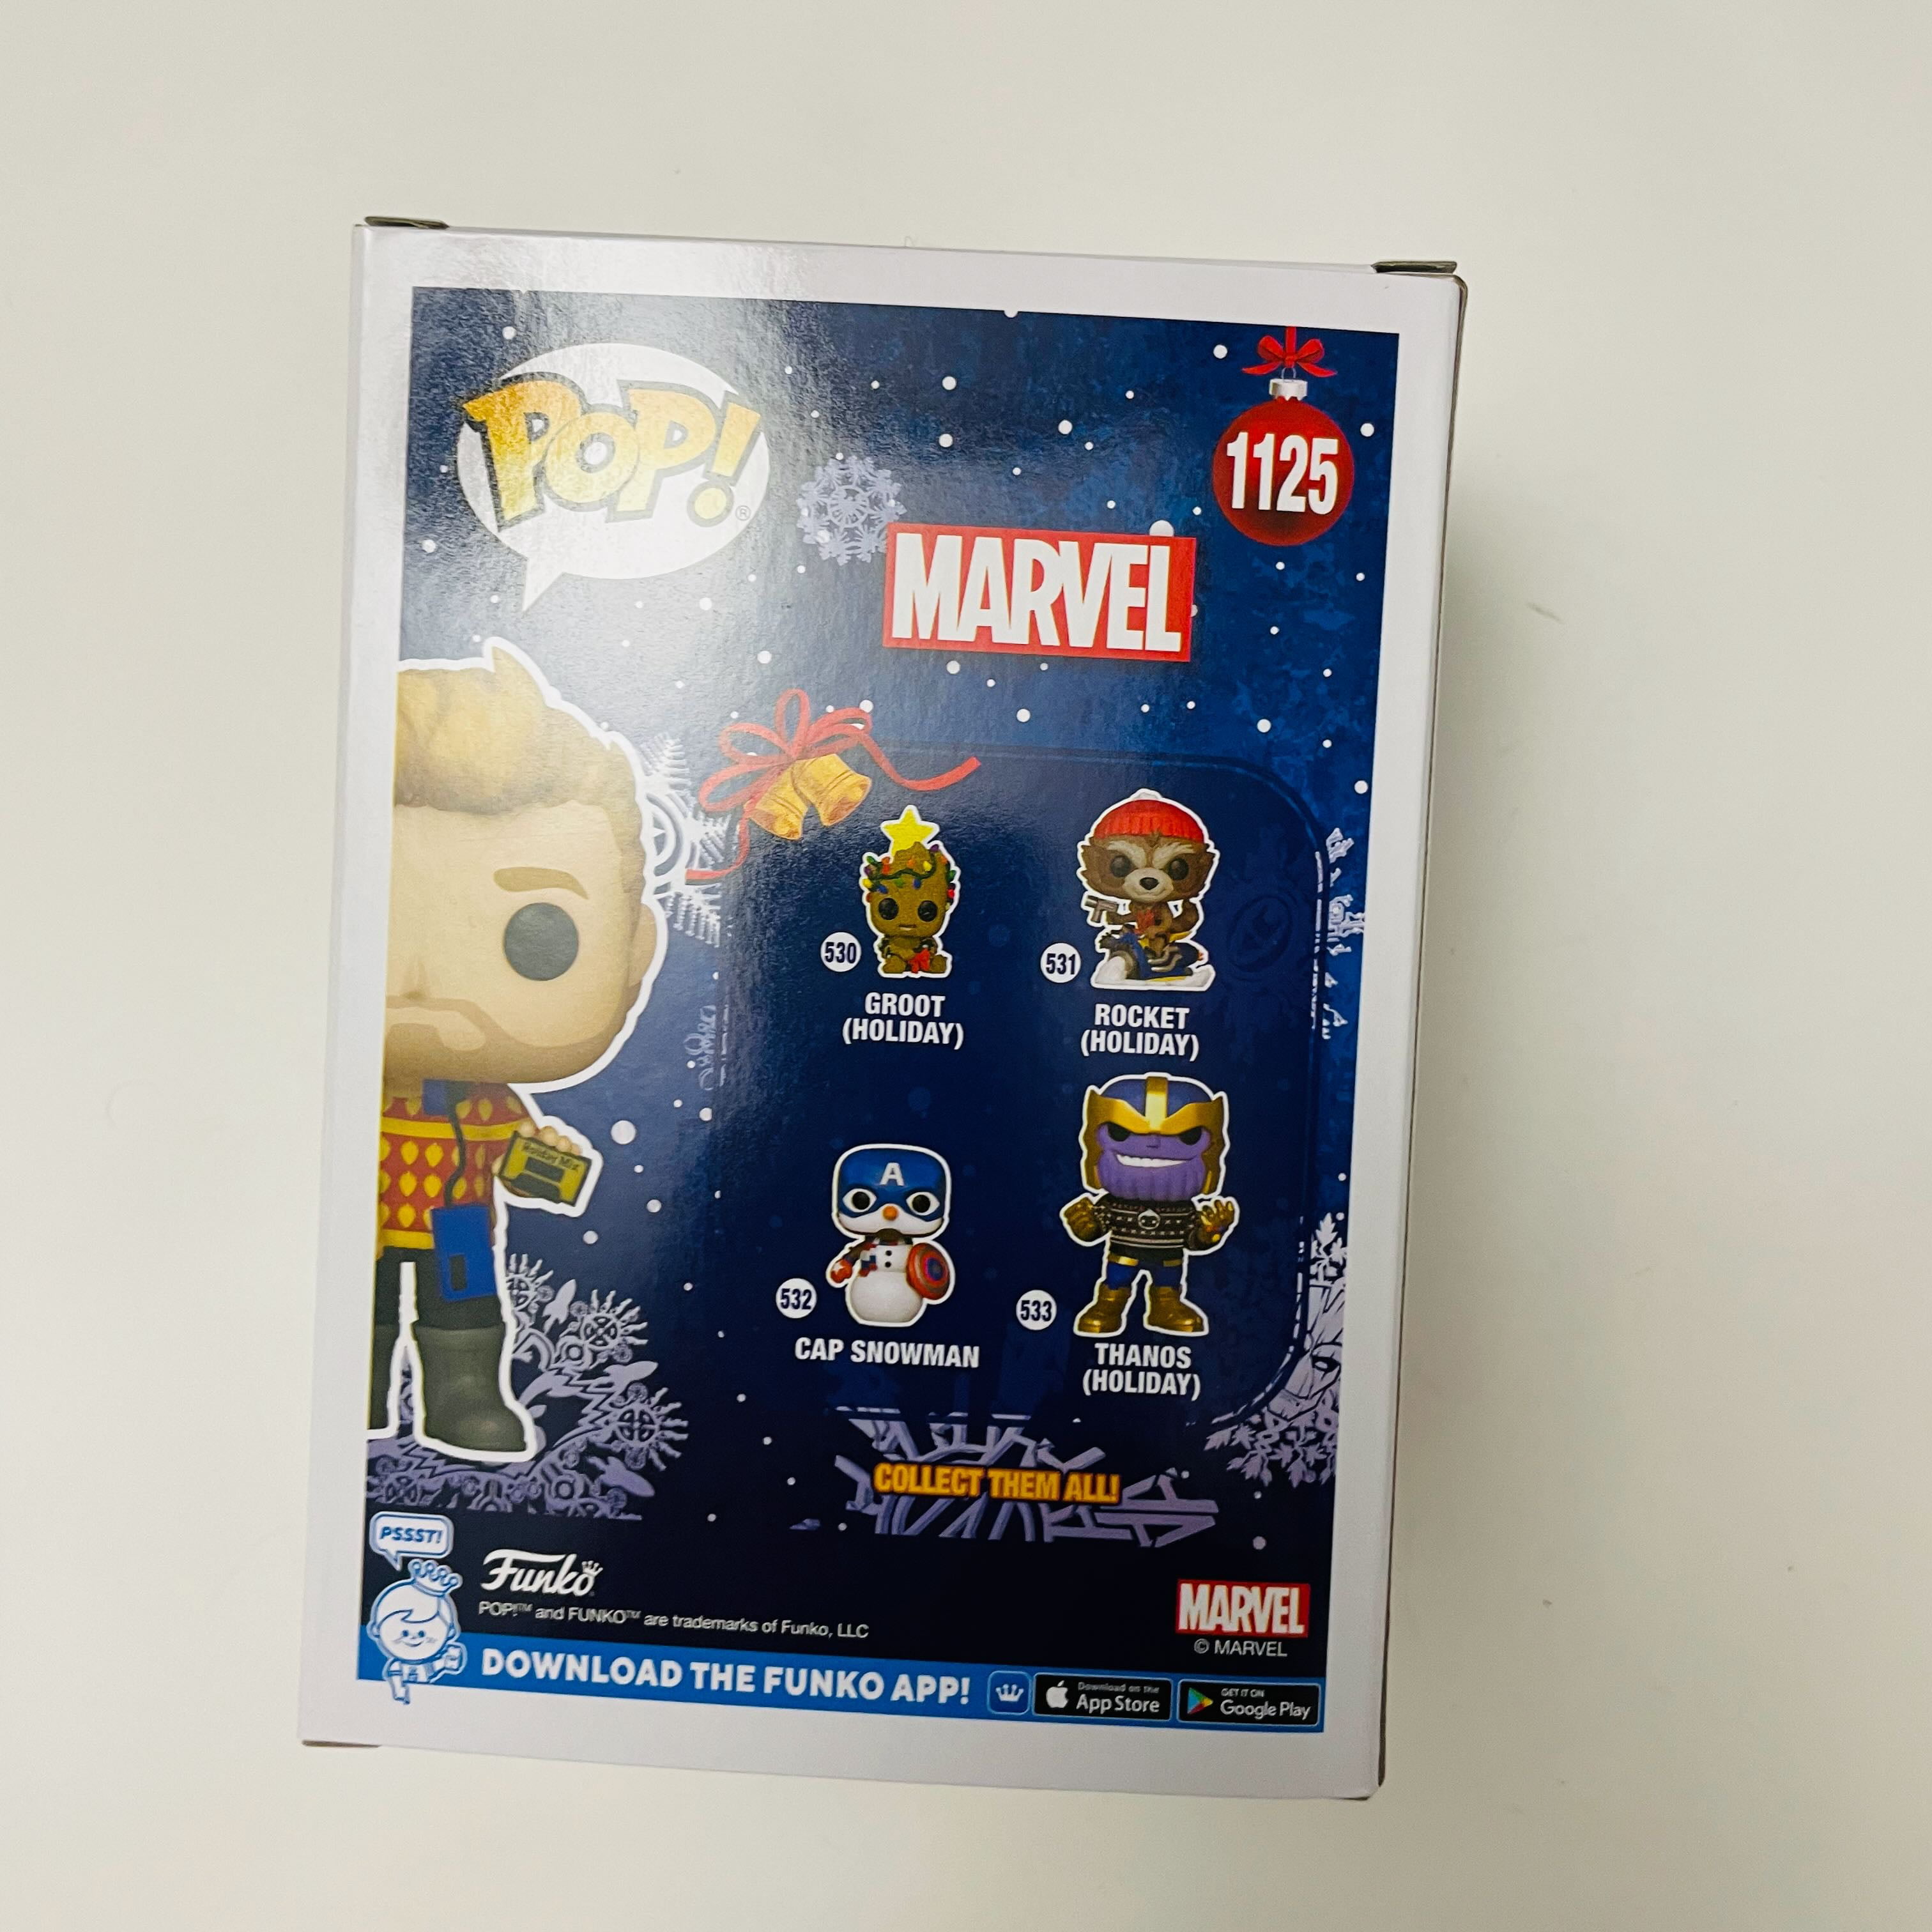 FunkoFinderz  Funko Pop! News & More! on X: RT & FOLLOW @funkofinderz for  a chance to WIN the Funko Exclusive Star-Lord with Groot Funko Pop! Vinyl  #Marvel #GuardiansOfTheGalaxy #Funko #FunkoPop #FunkoPopVinyl #